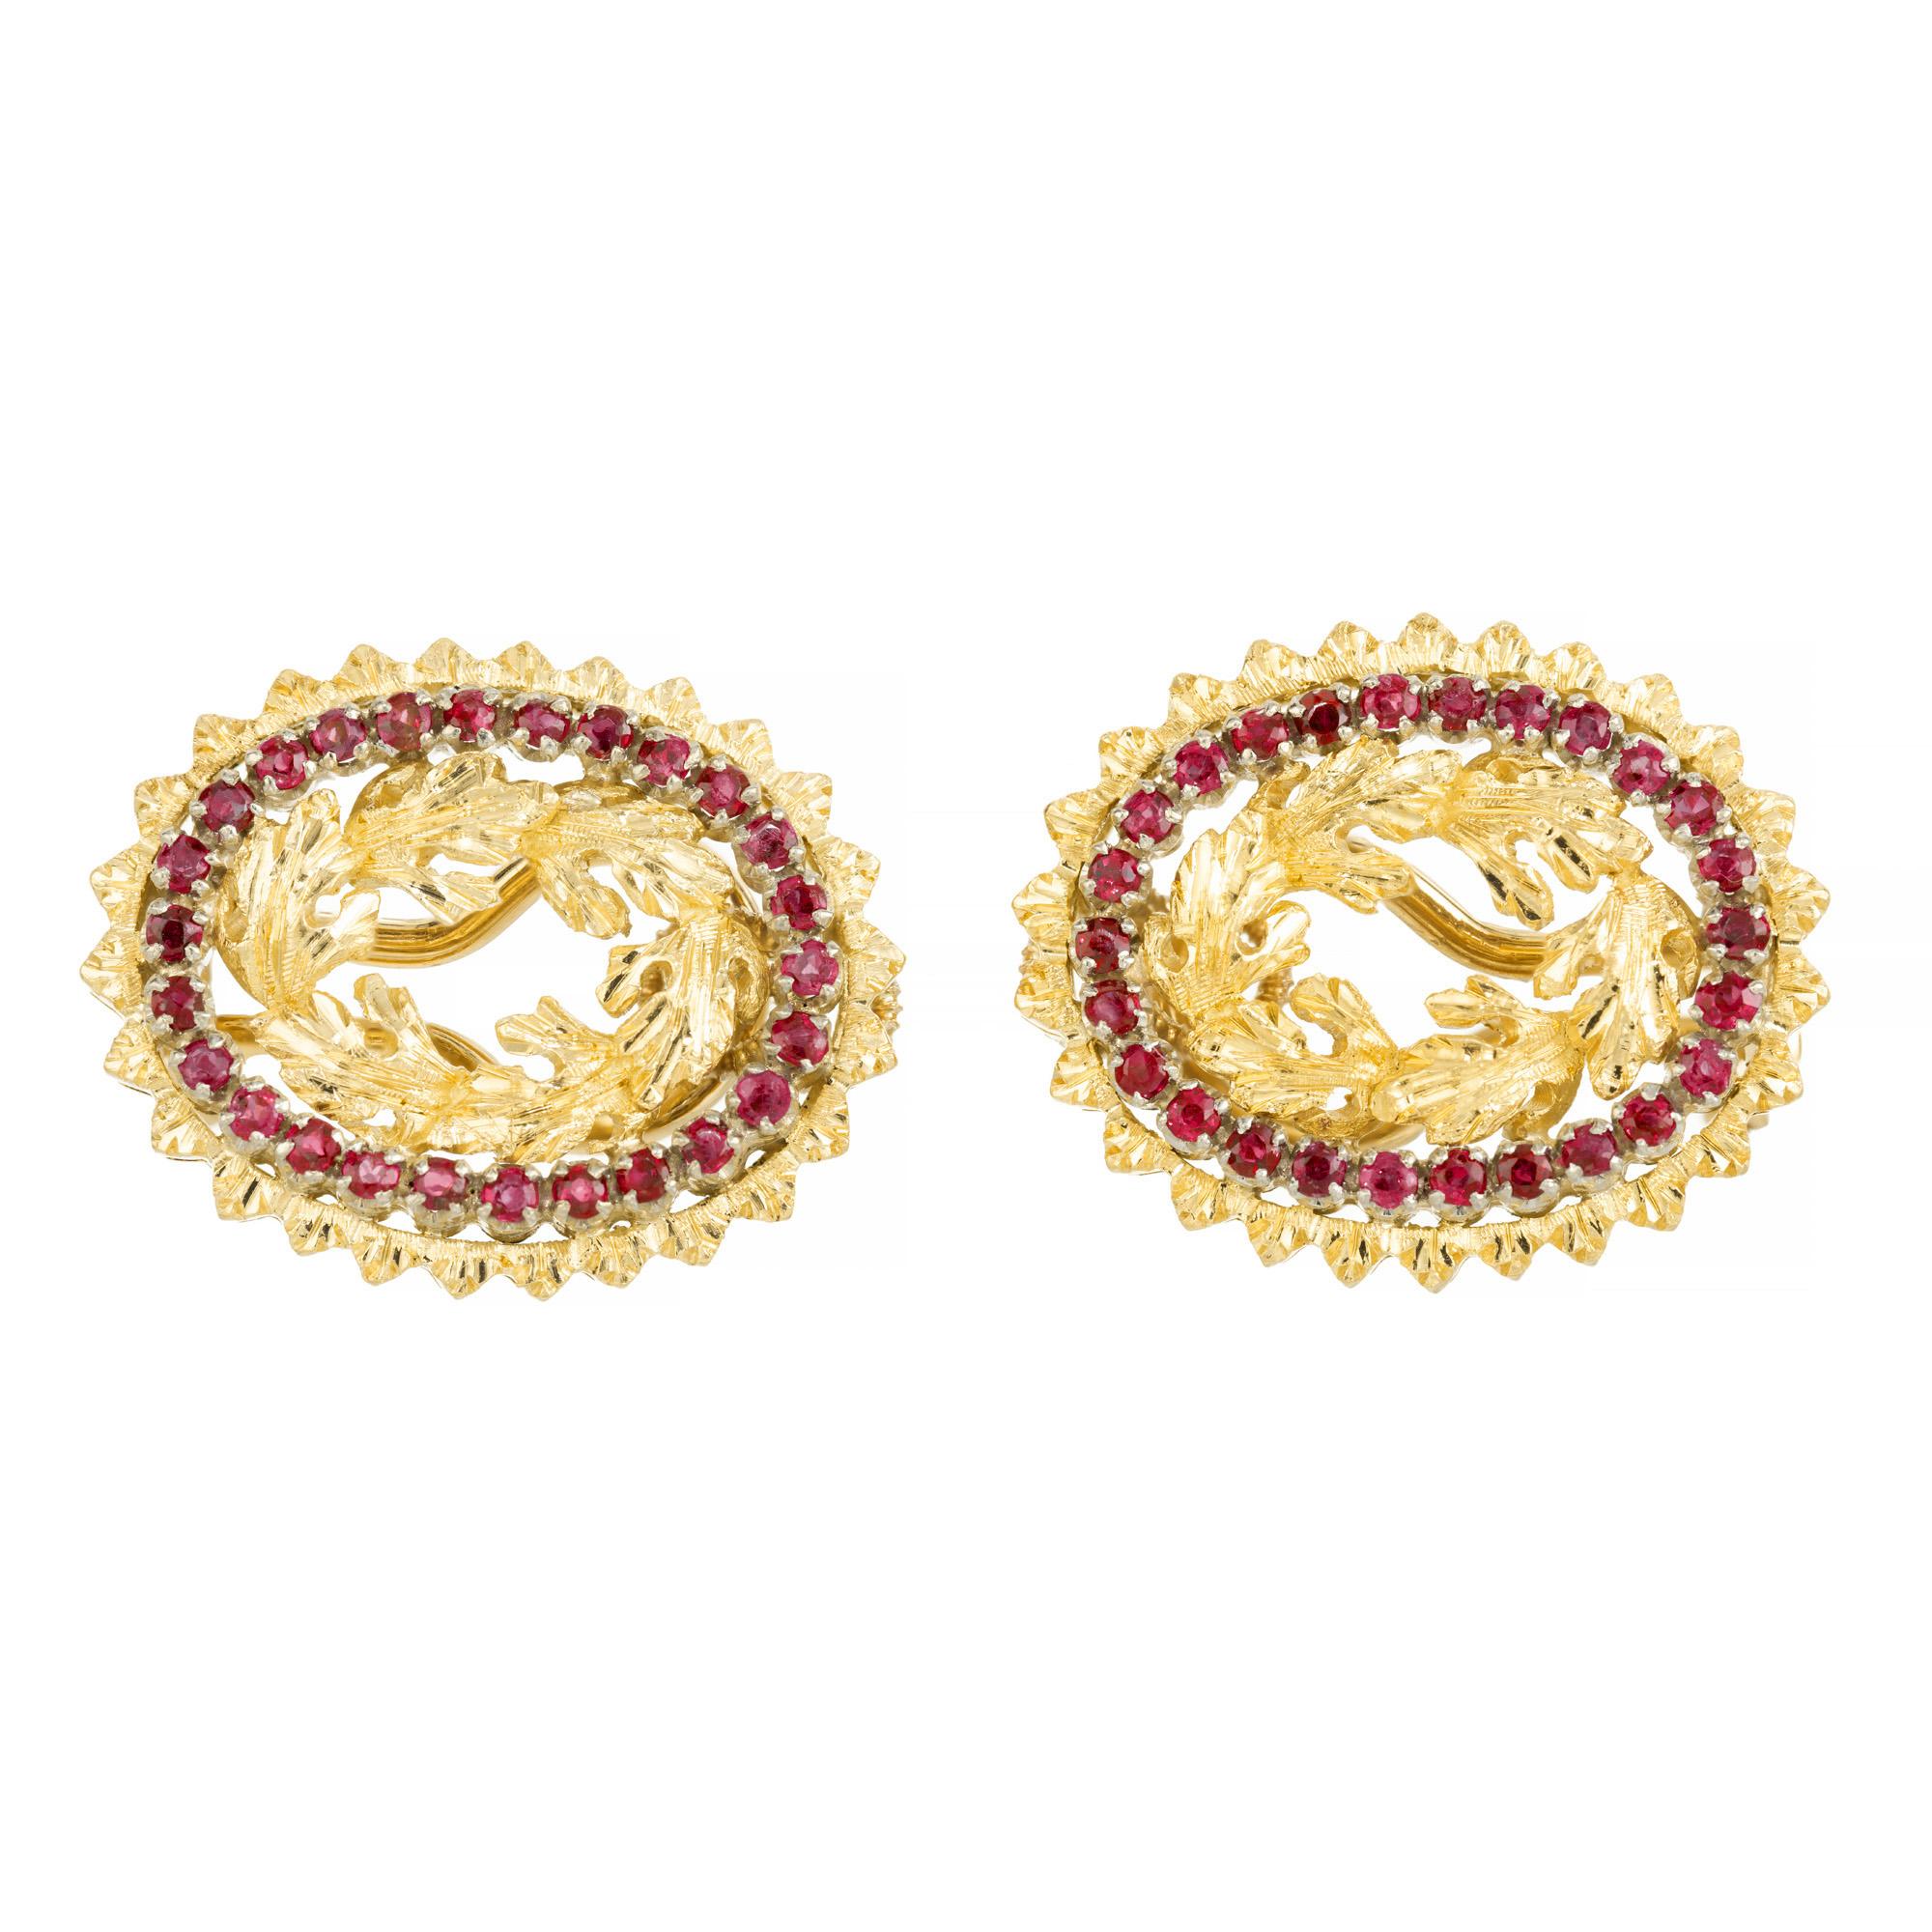  .70 Carat Ruby Yellow Gold Lever Back Earrings, a true testament to beauty and elegance. Crafted with utmost detail, each earring is adorned with 26 round red rubies. In the center are high detailed leaf style designs. The lever back design ensures